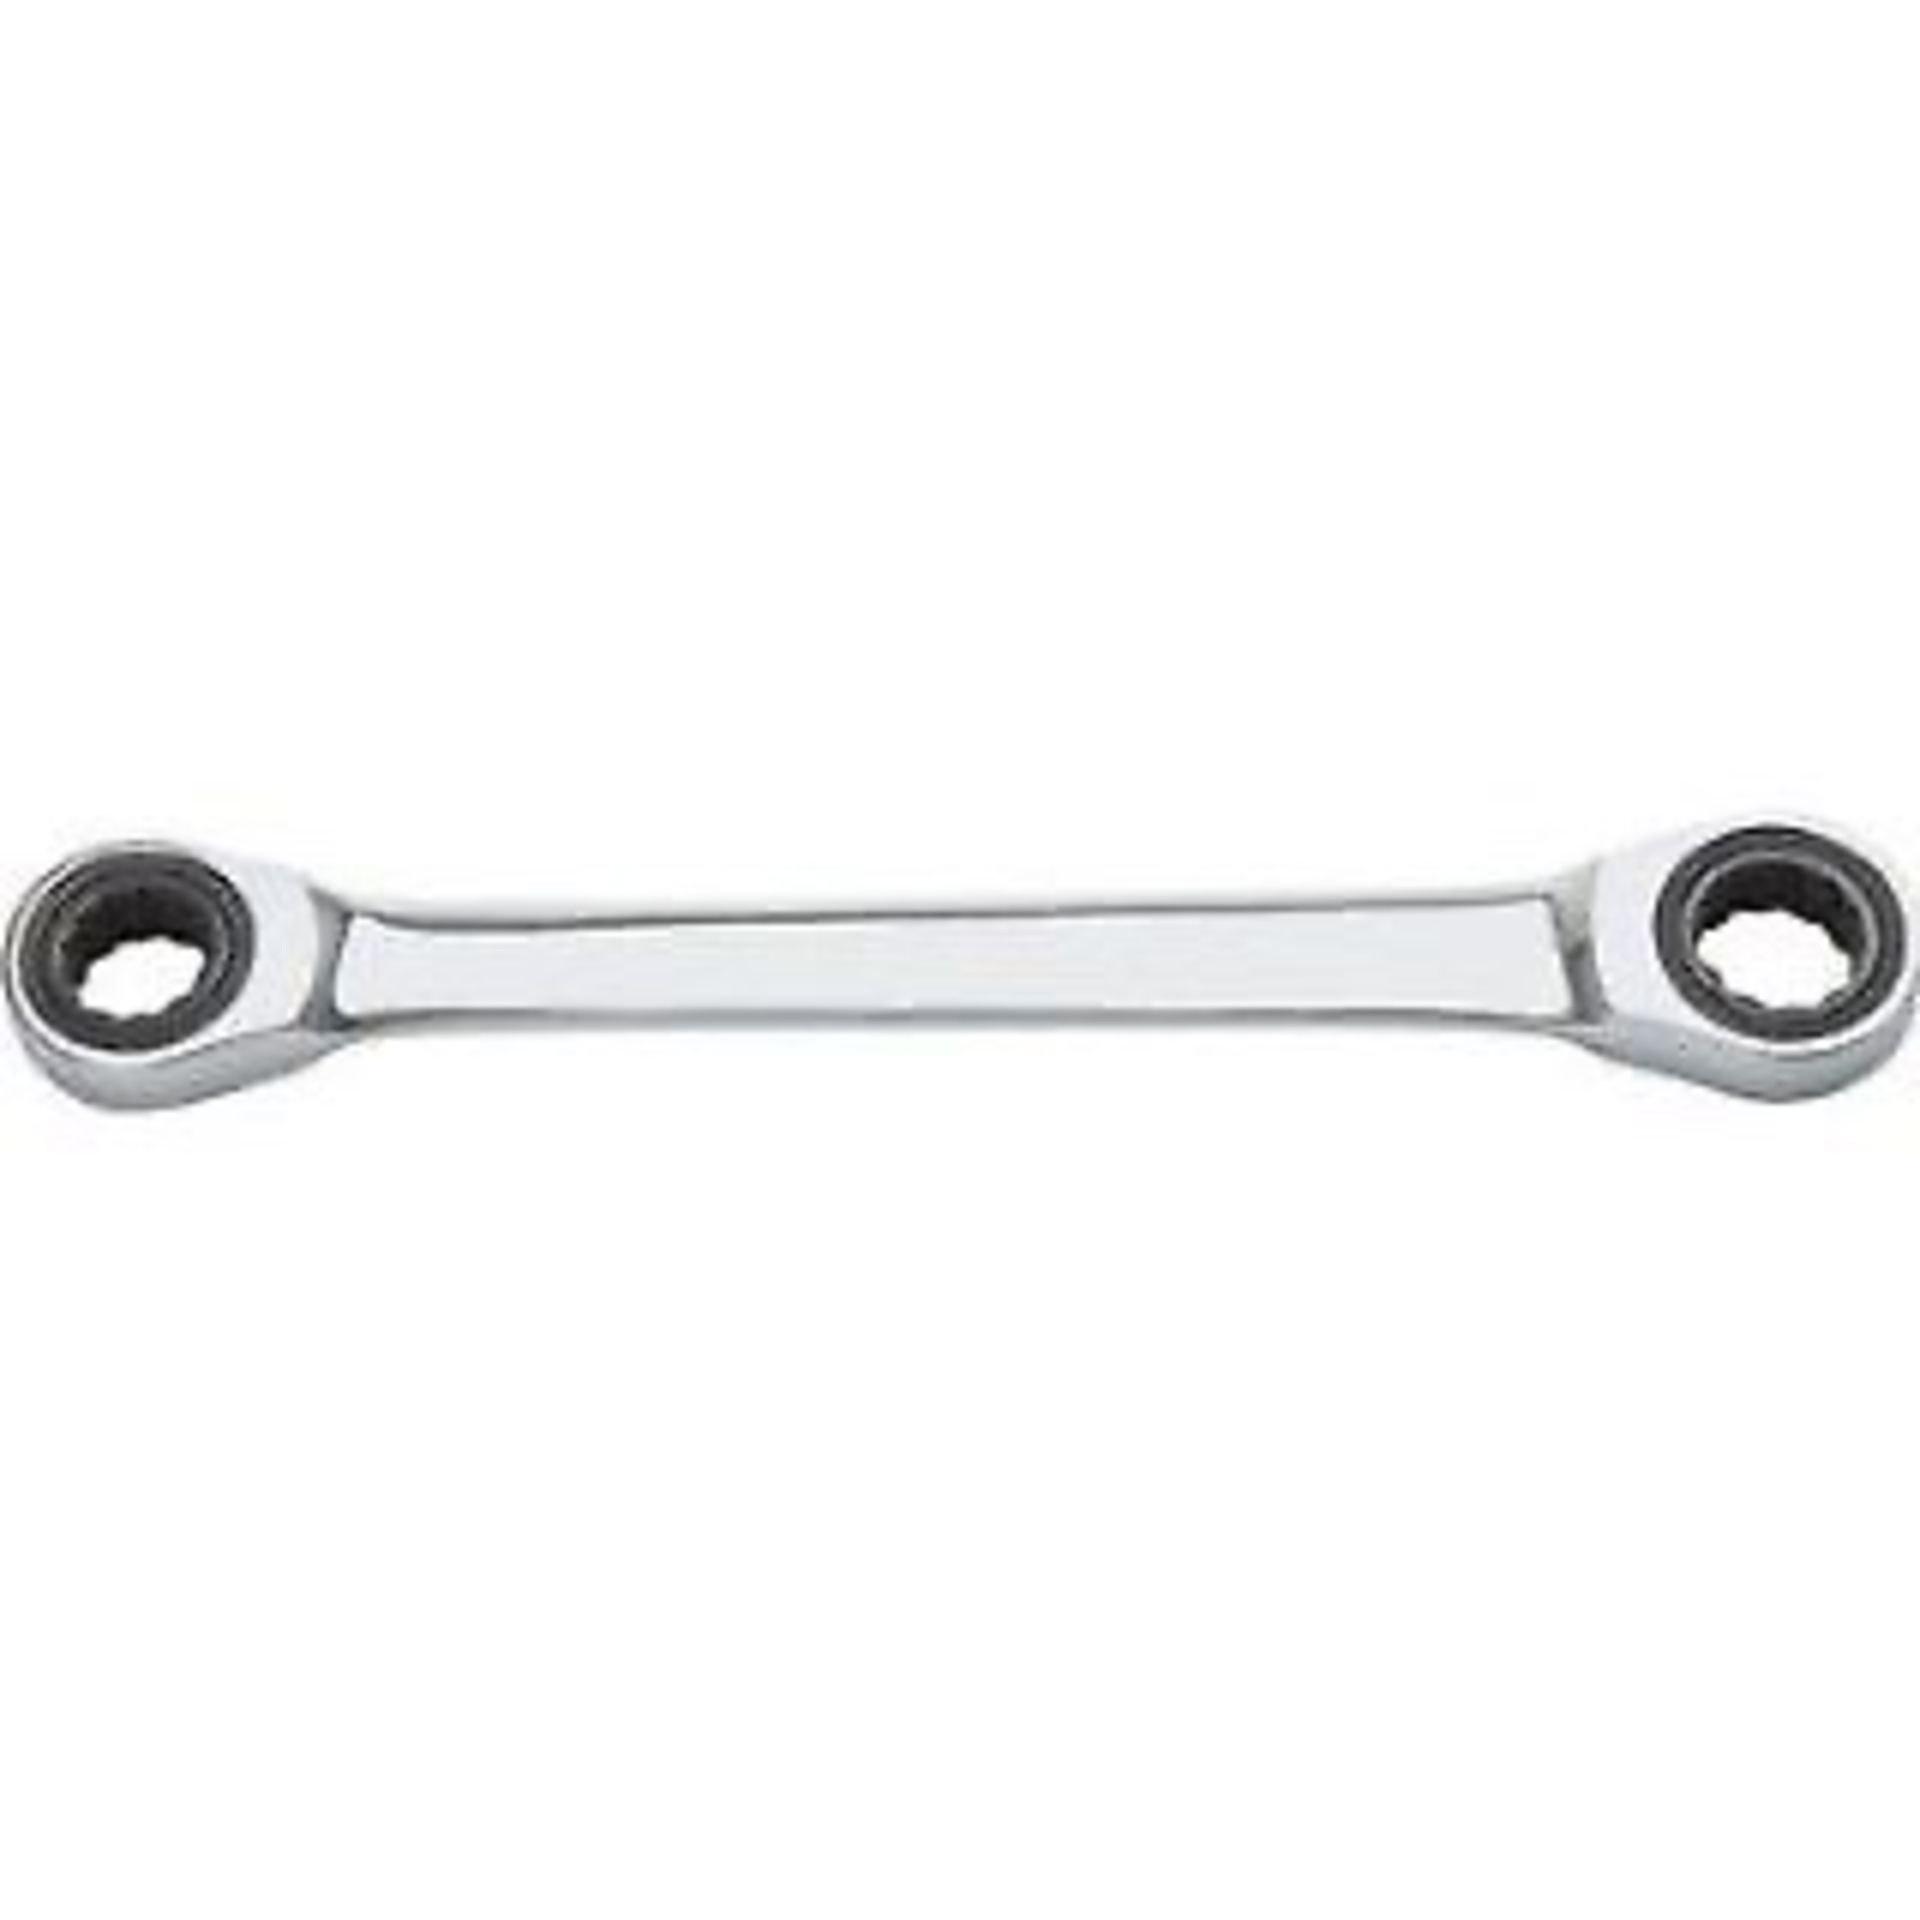 11 x 1/2" & 7/16" Ratcheting Double Box Wrench. Titan Tools 13527 no vat on hammer.You will get 11